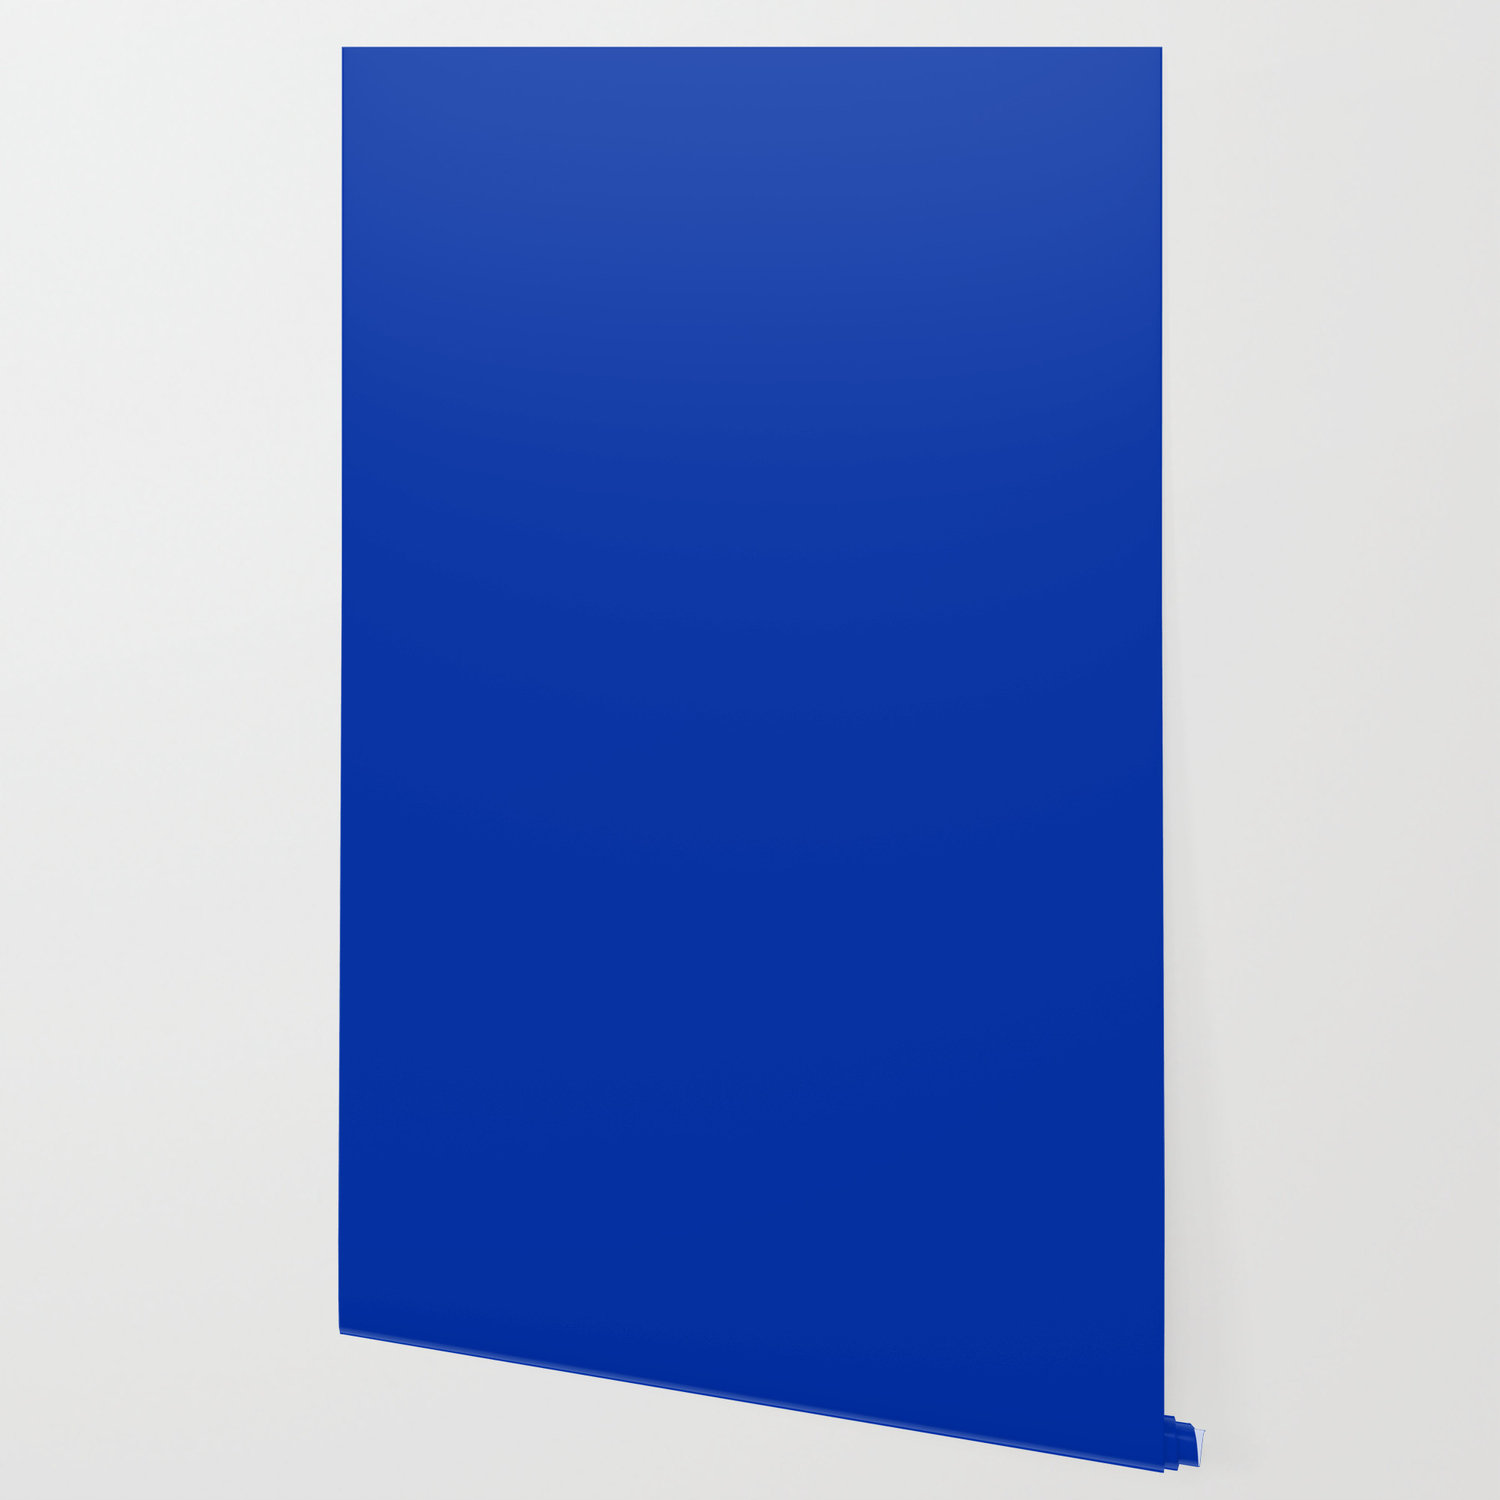 International Klein Blue Wallpaper by List of colors | Society6